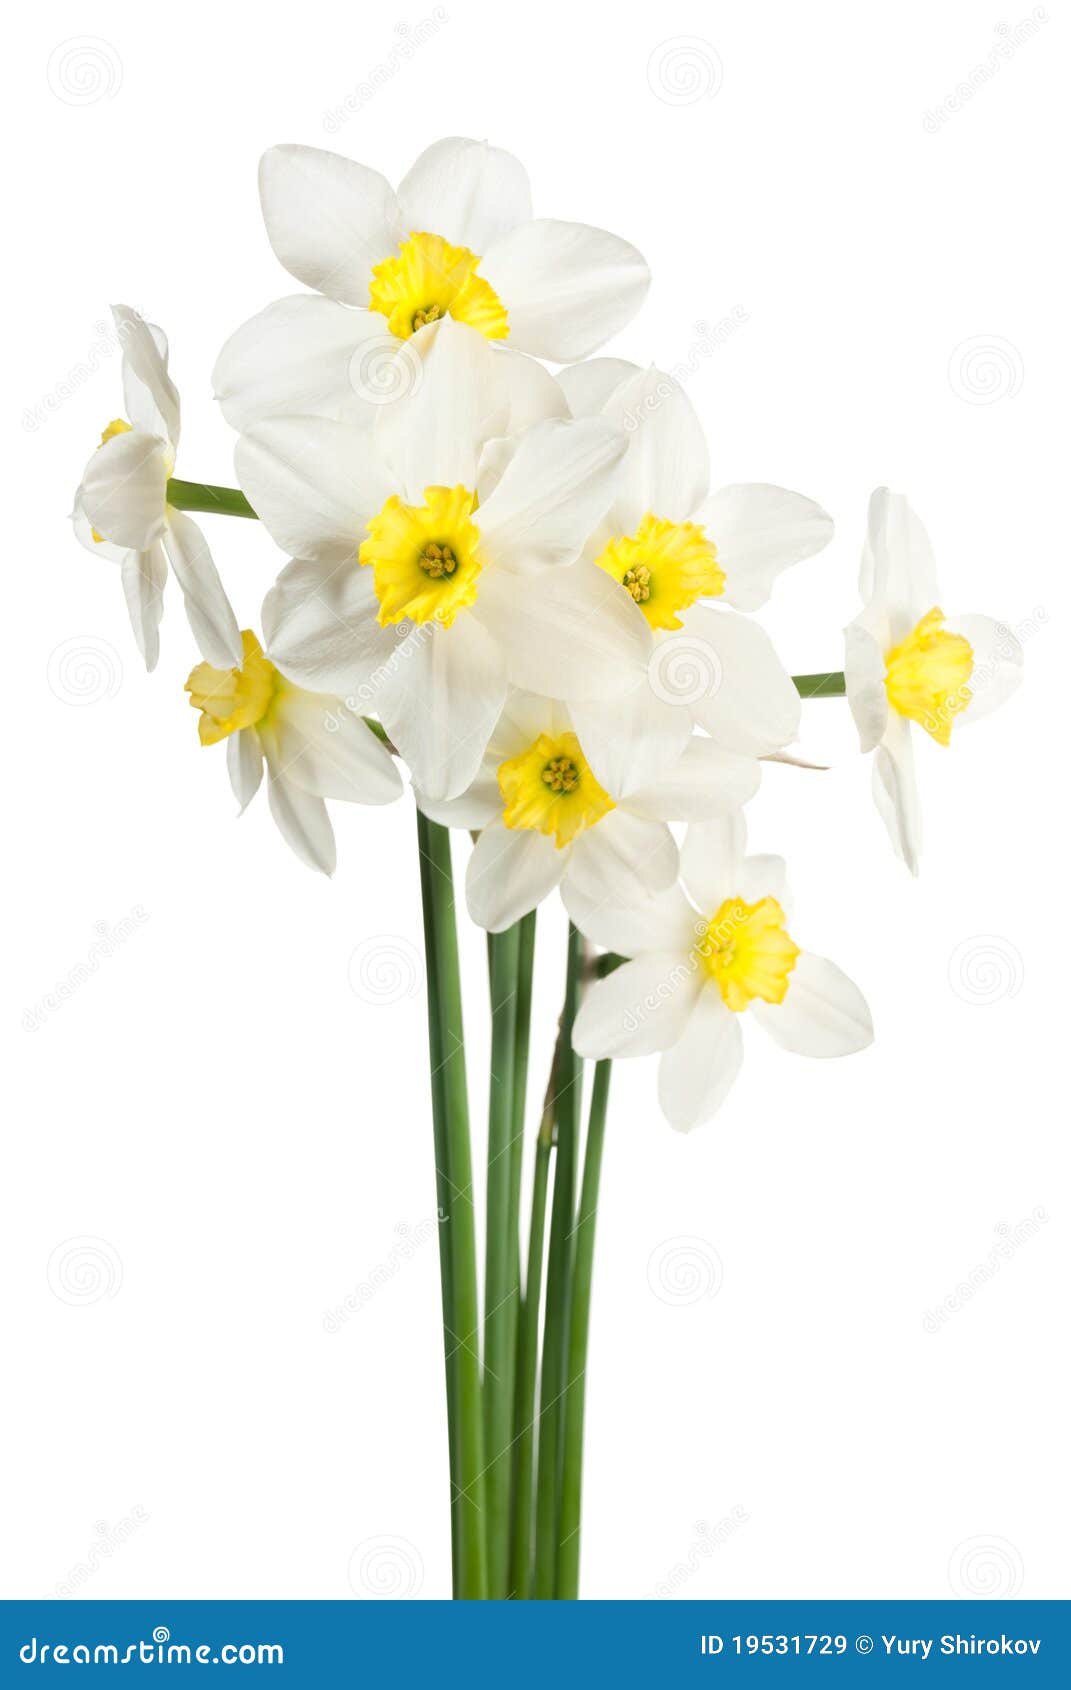 White Narcissus Bouquet Royalty Free Stock Images  Image: 19531729